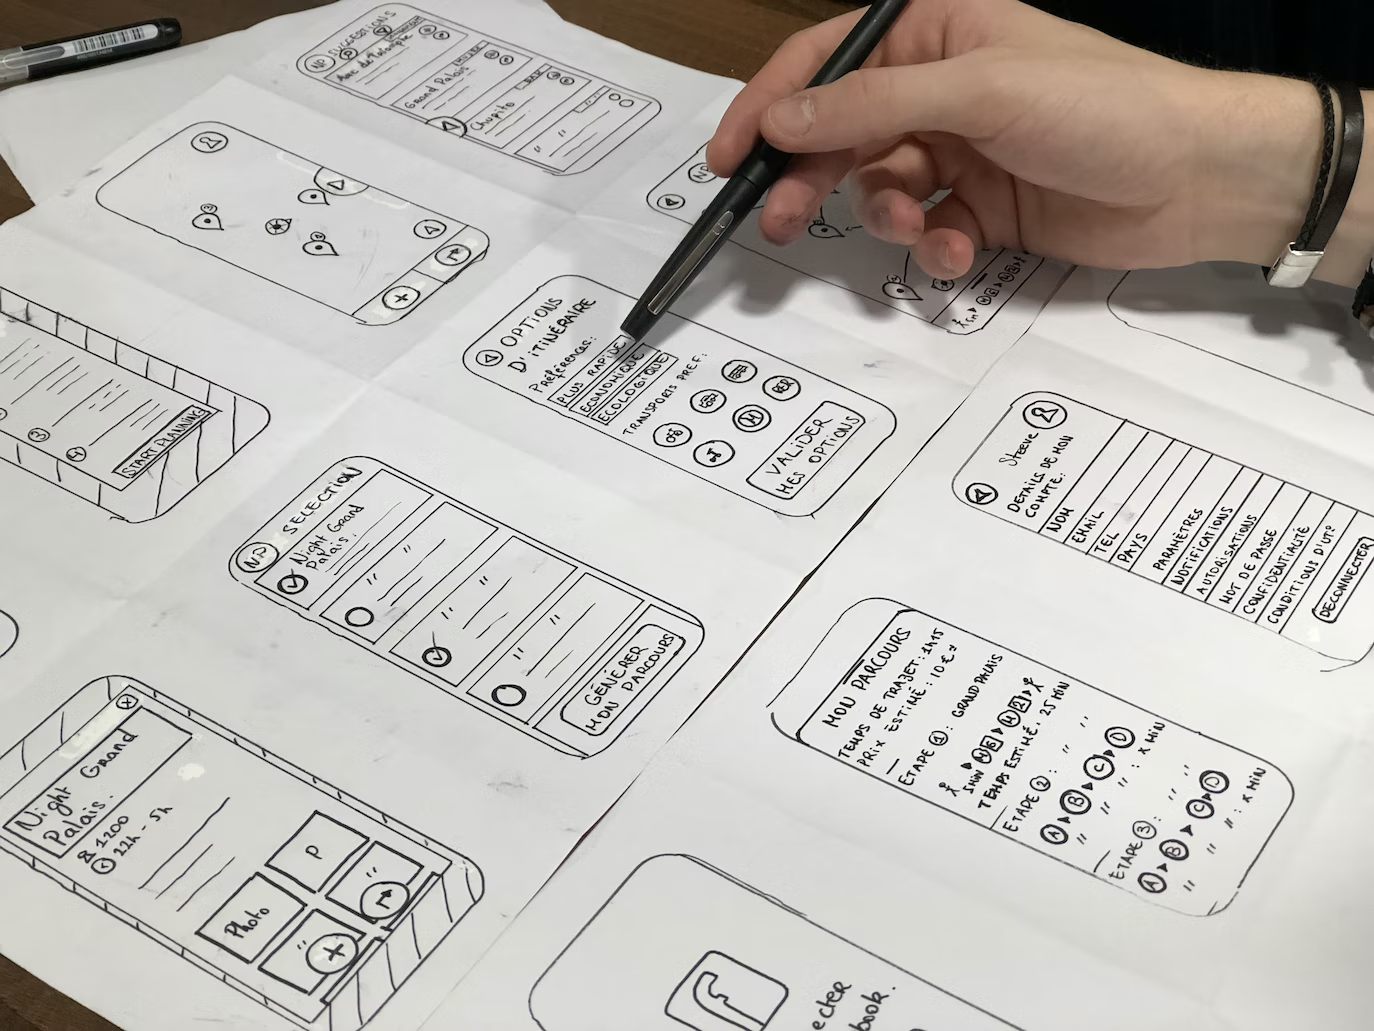 low-fidelity wireframes for a mobile app